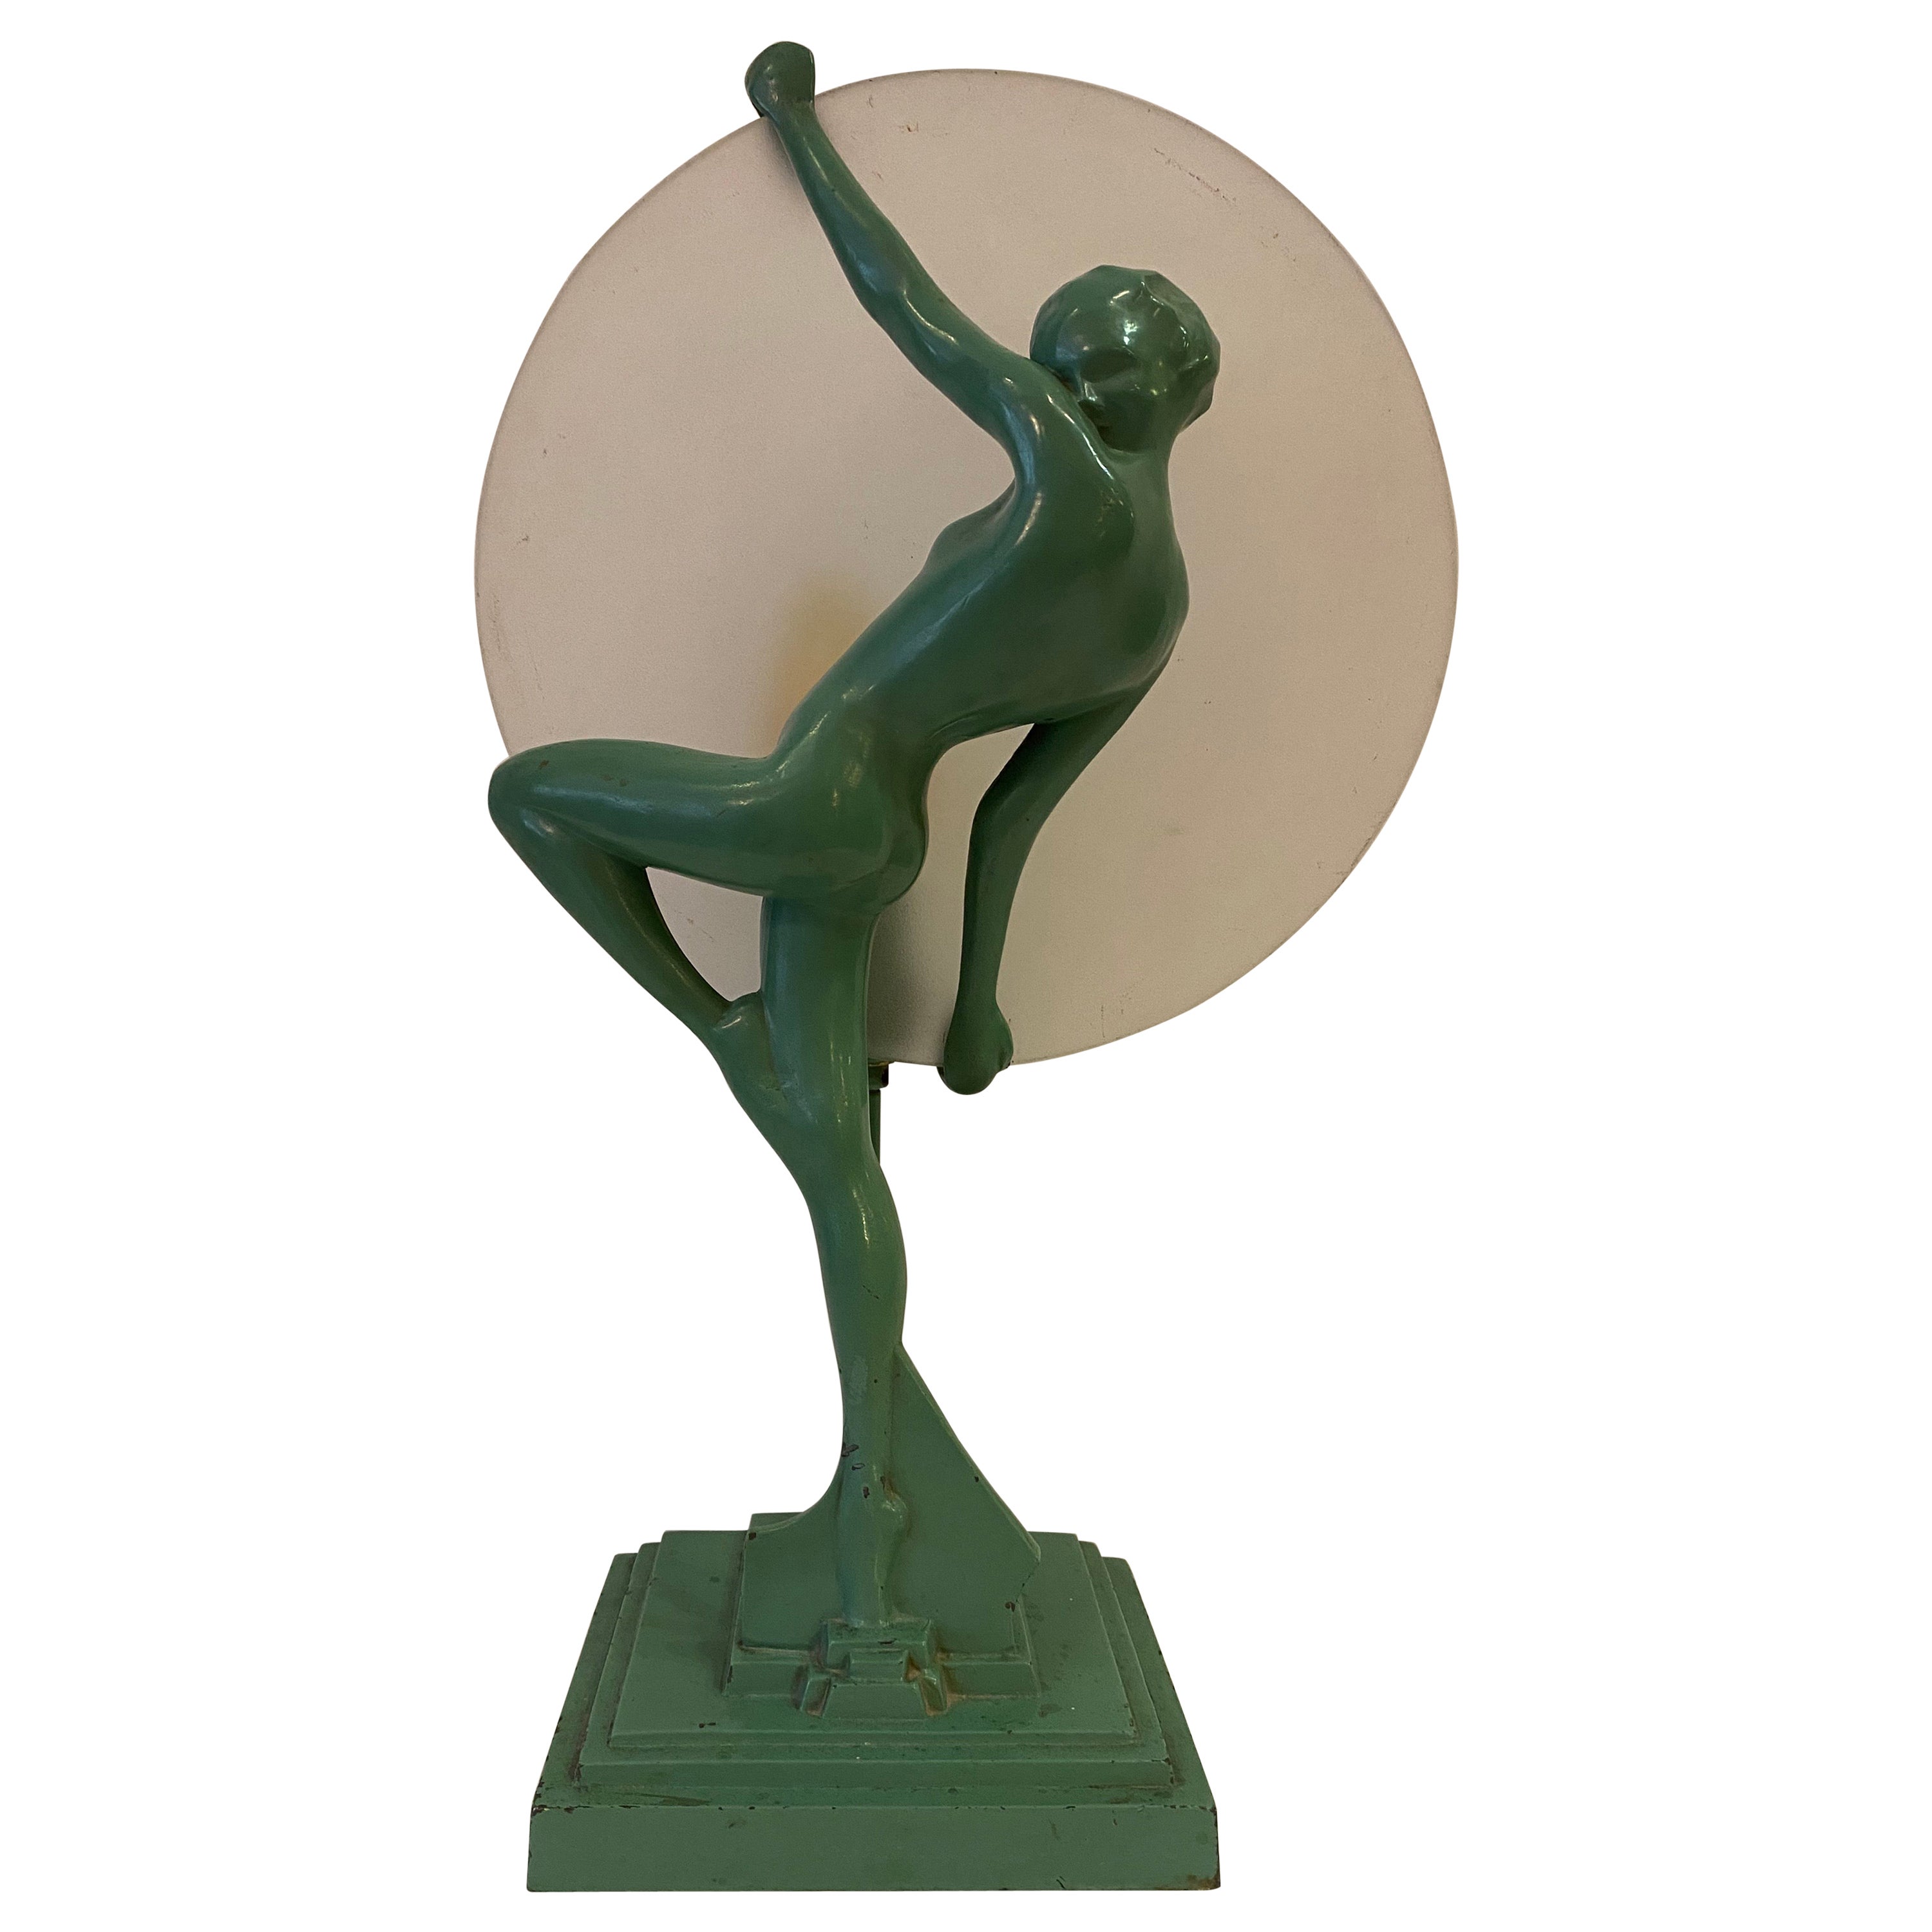 Details about   Frankart style art deco moderne nymph figurine for lamp or bookends black USA 